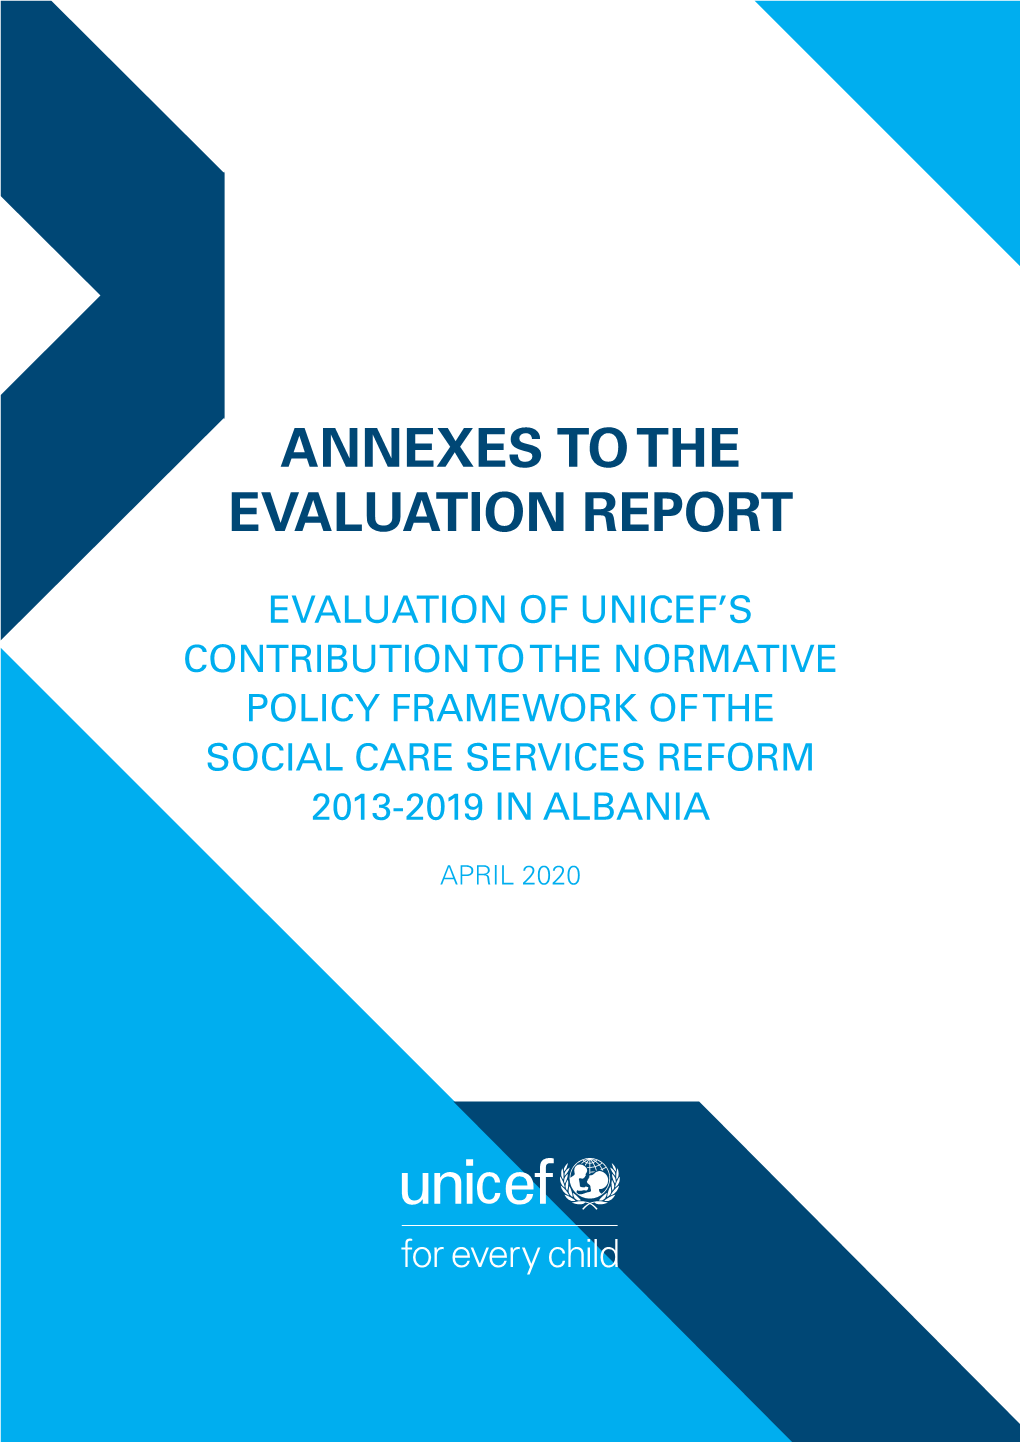 Annexes to the Evaluation Report